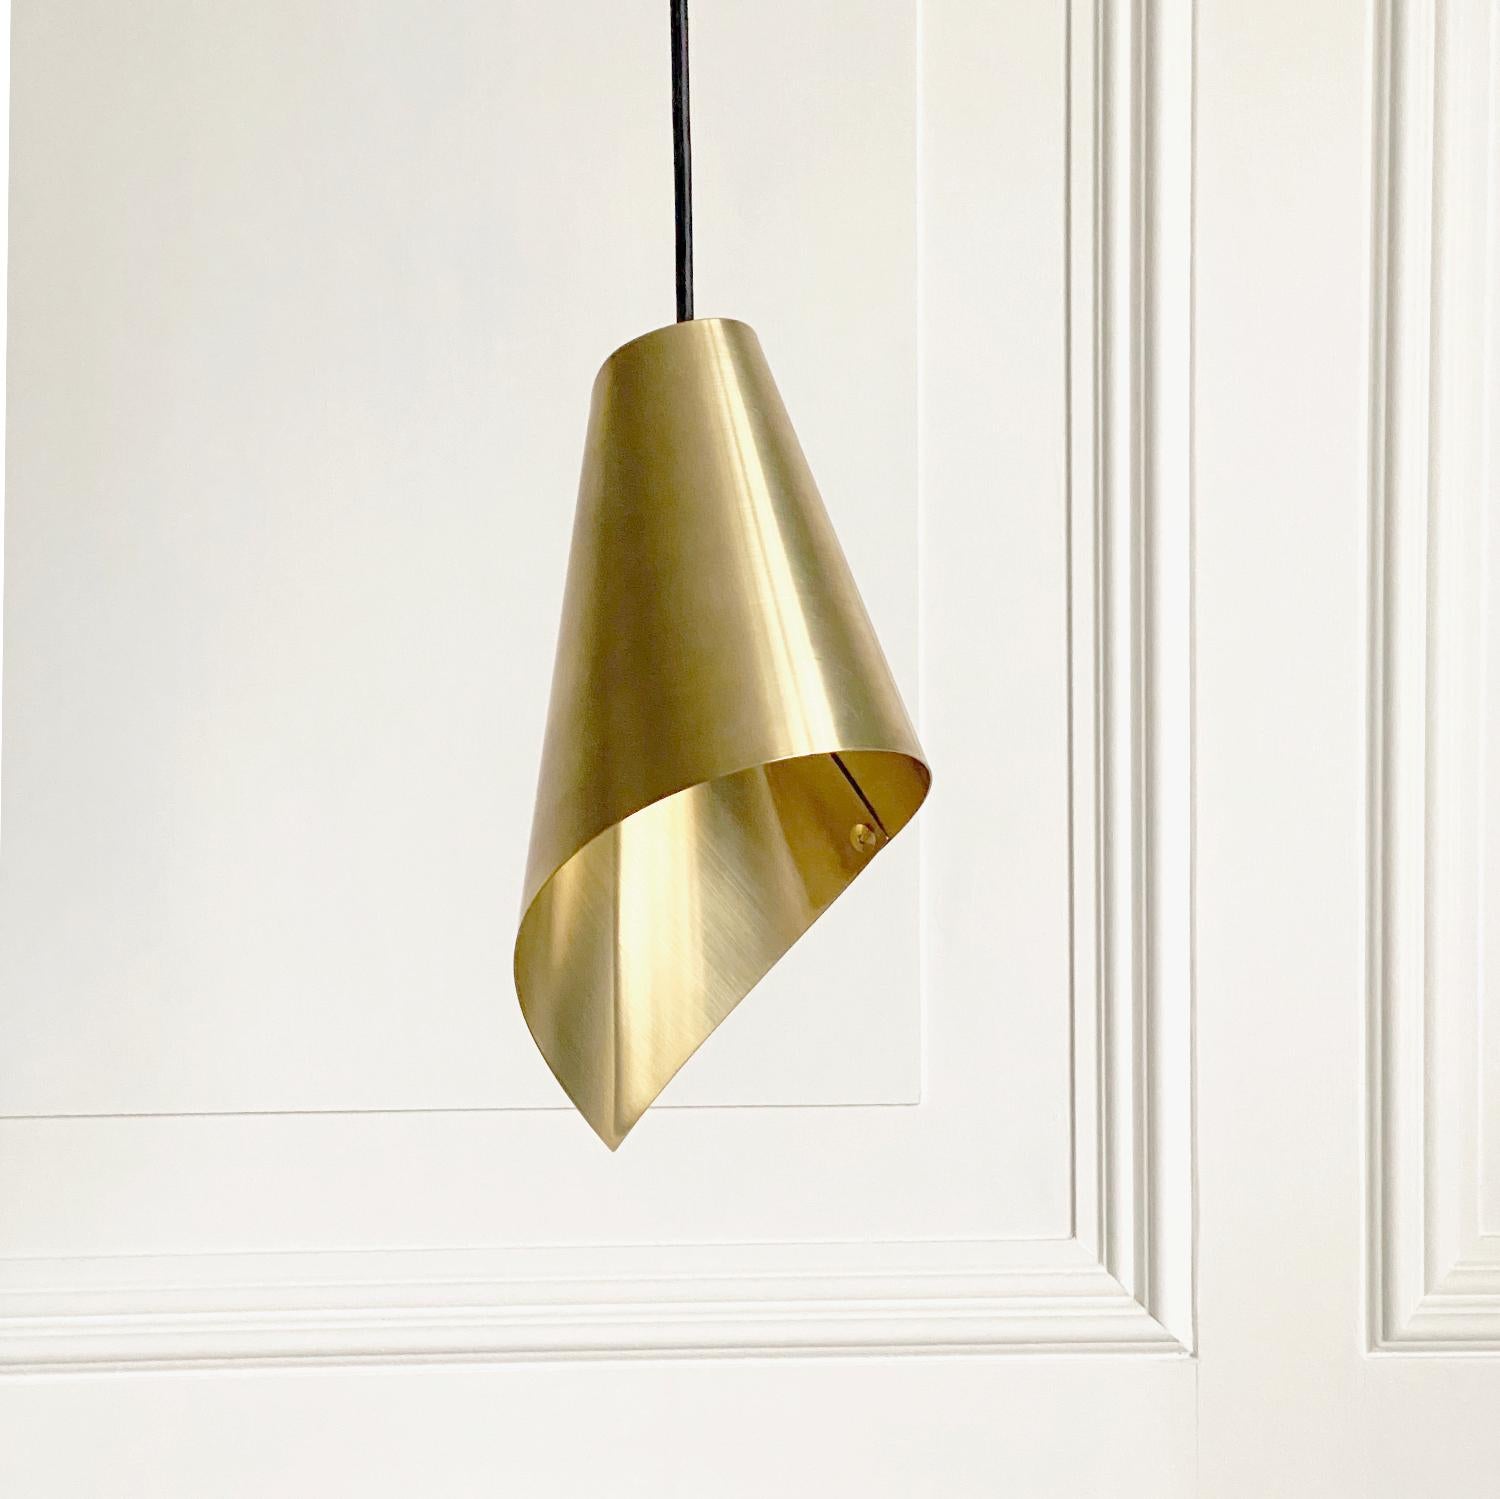 The brushed brass ARC pendant light can be used in many different configurations to stunning effect. Hang singles or in rows to create individual pools of light or in clusters of 3 or 5 to give wider illumination.

Hand wrapped from a single metal